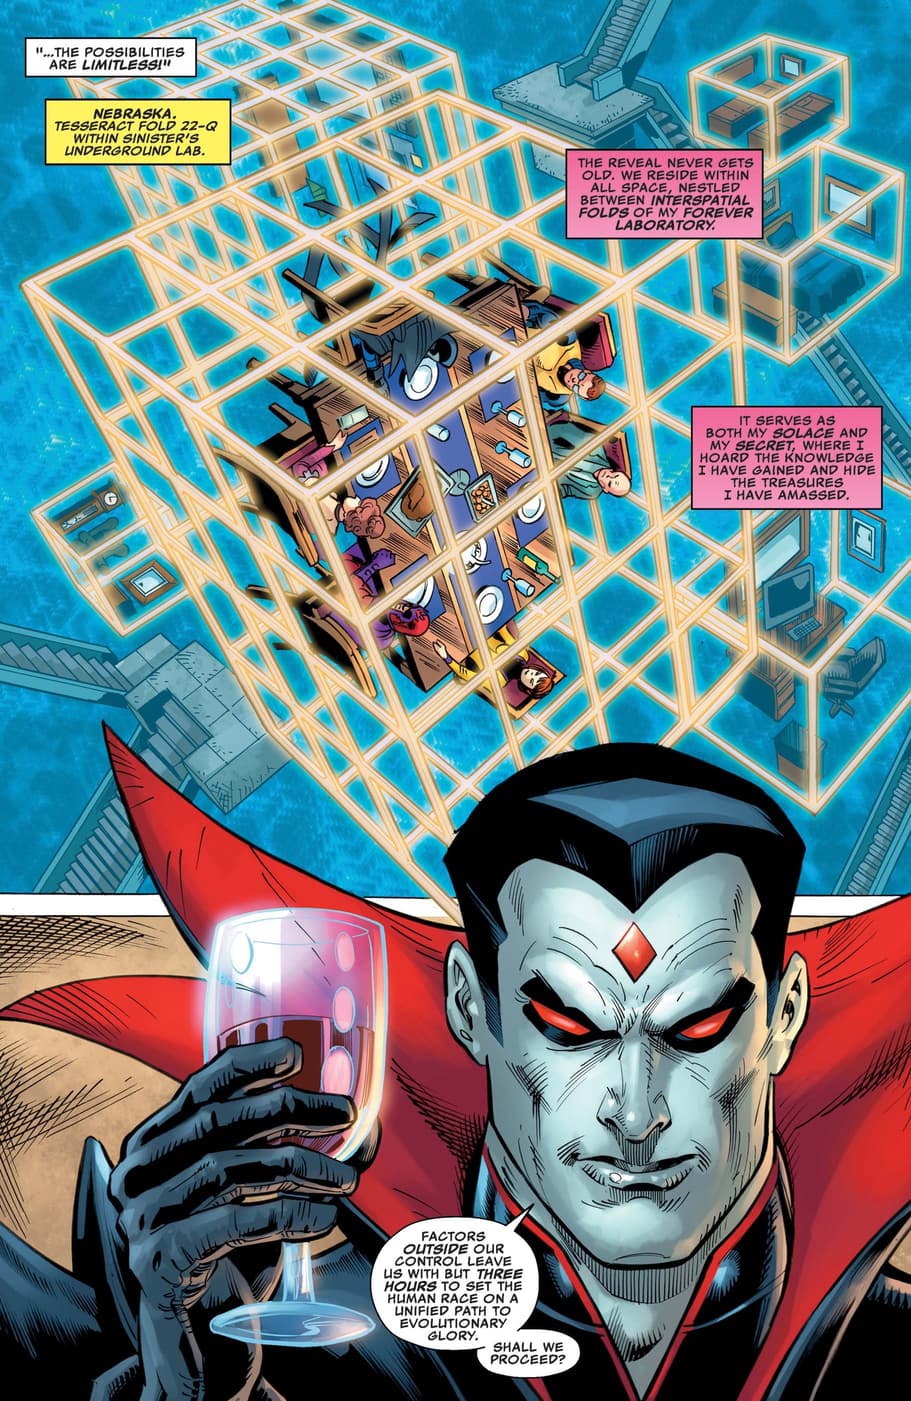 Mister Sinister raises a glass to the X-Men